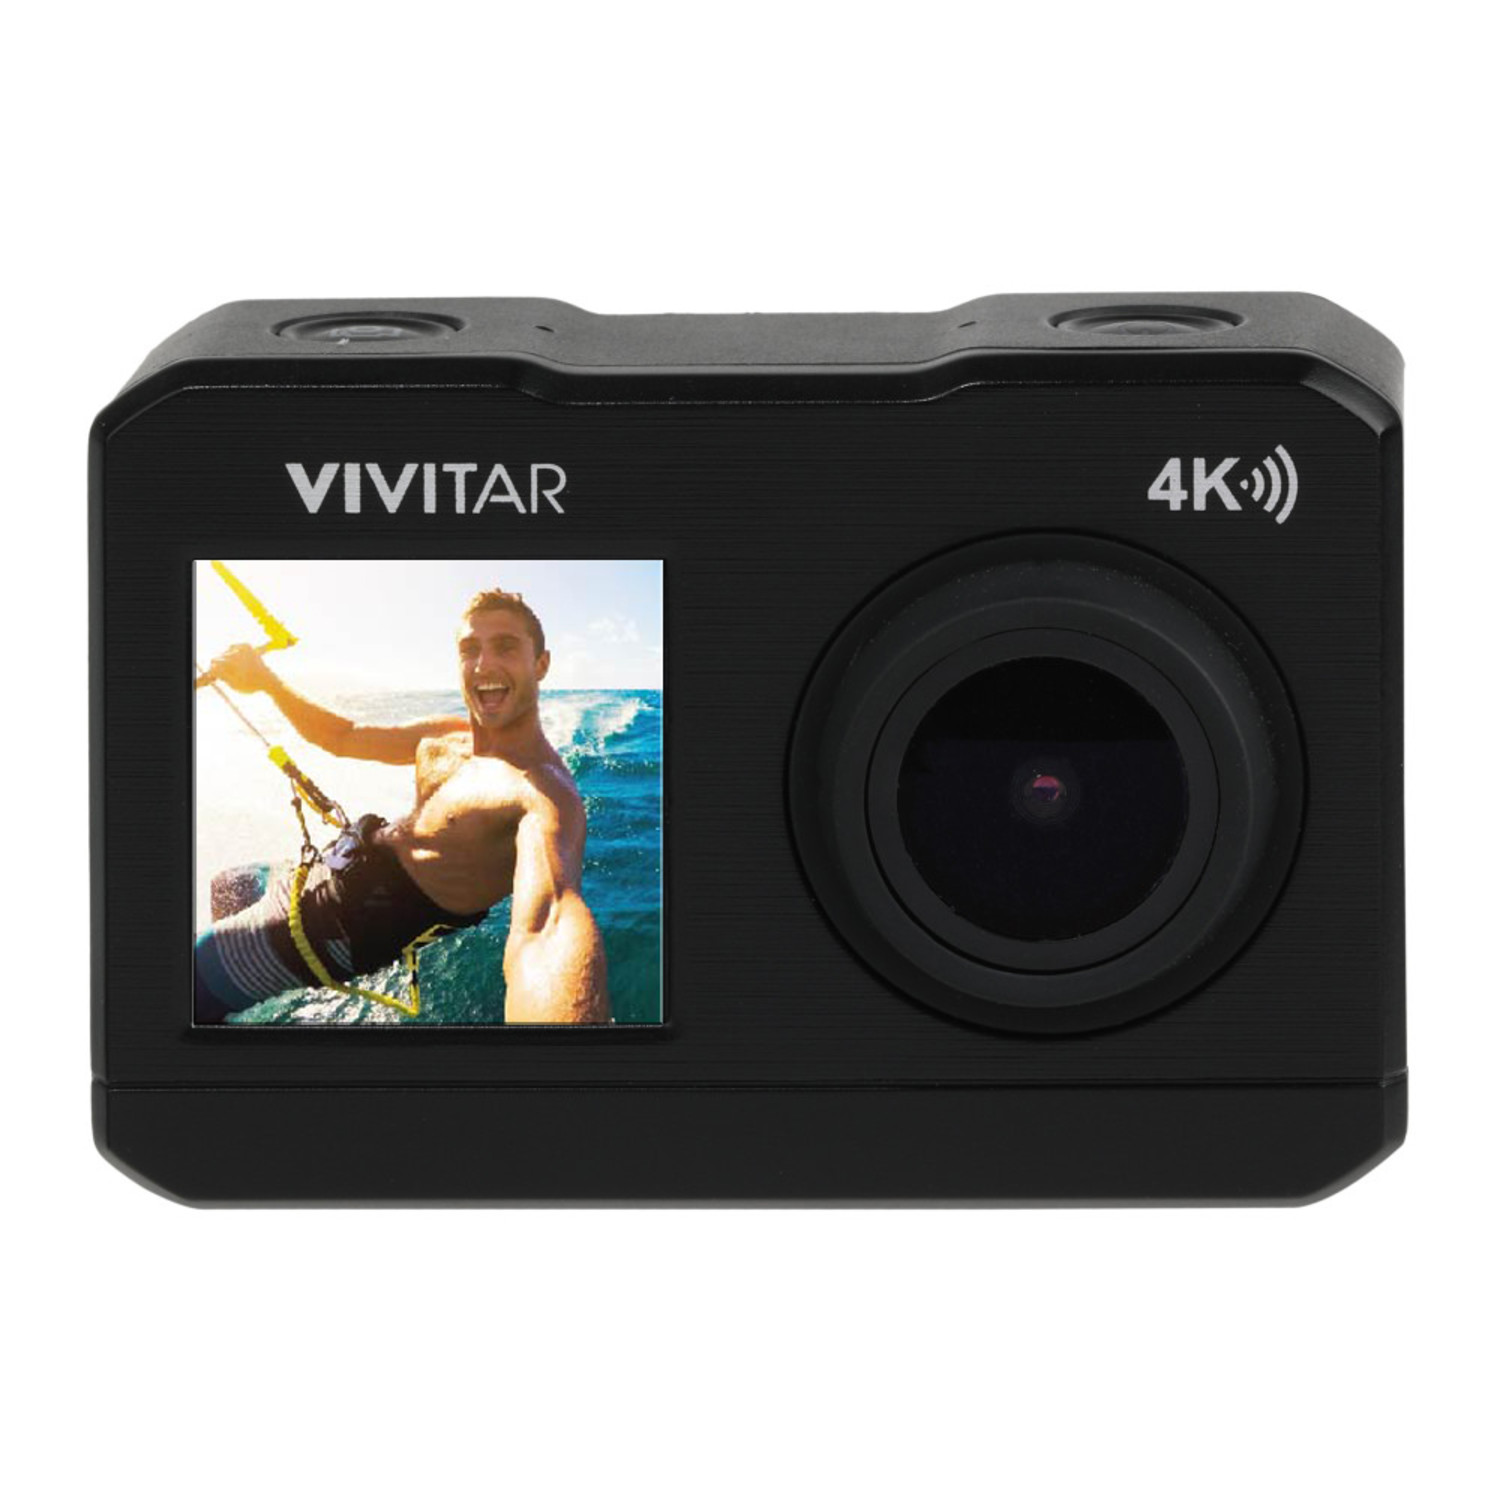 Vivitar 4K Ultra HD Action Camera Kit, Dual Screen with Wifi, Bonus Battery, Includes SD Card, Floating Handle, Tripod, Mounts - image 3 of 15